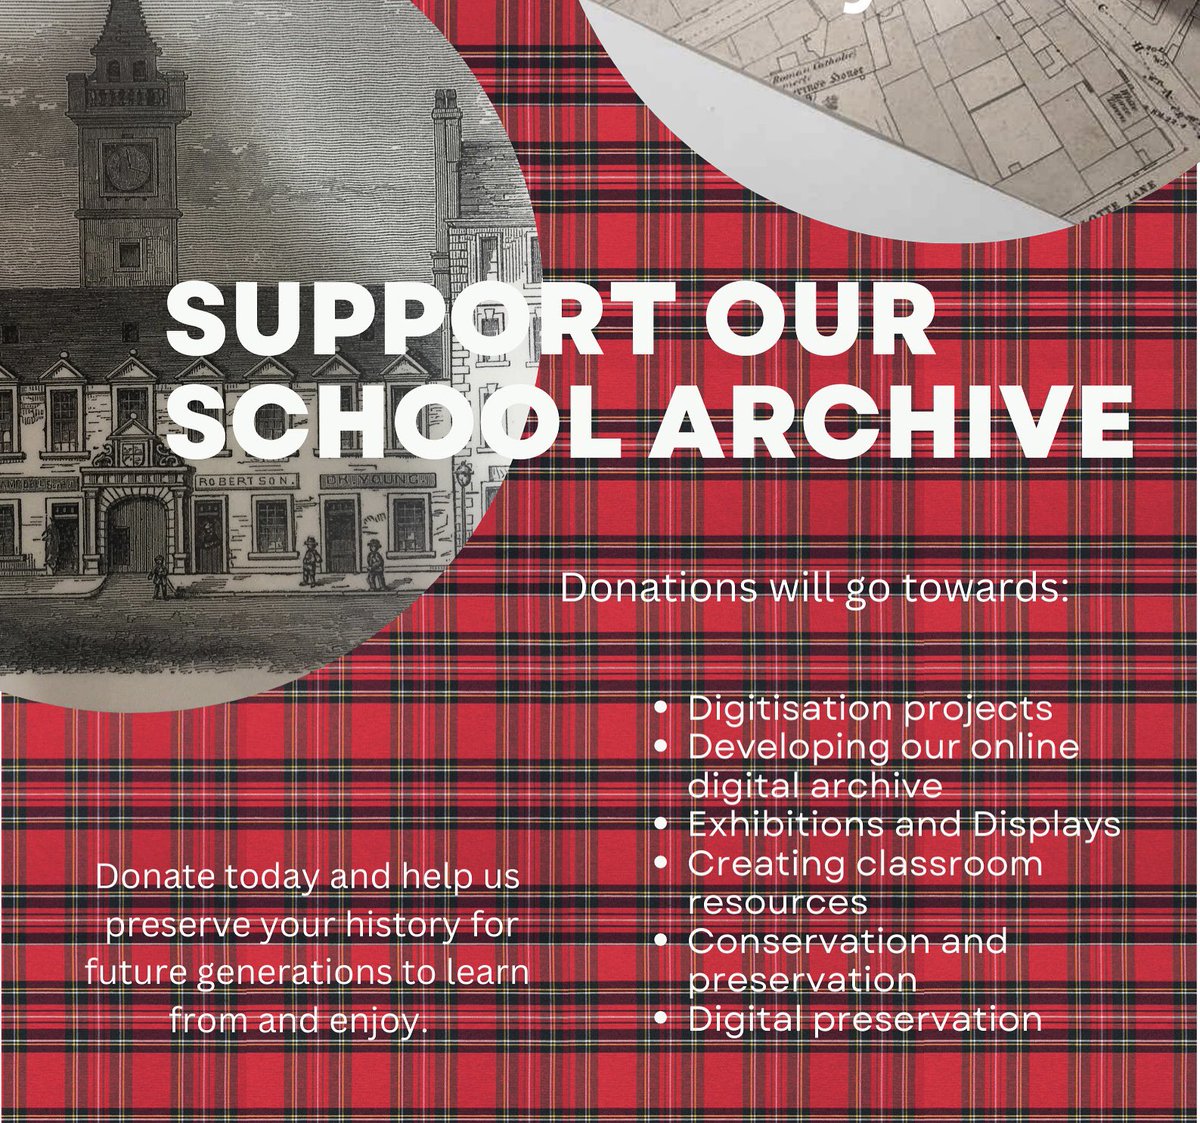 It’s the first day of #Archive30 and it’s #YourArchive we are always telling pupils, past and current, “the archive is YOUR archive to use, learn and discover”. They support it by donating 300 items a year and we continue to work towards many great projects #HutchieHistory